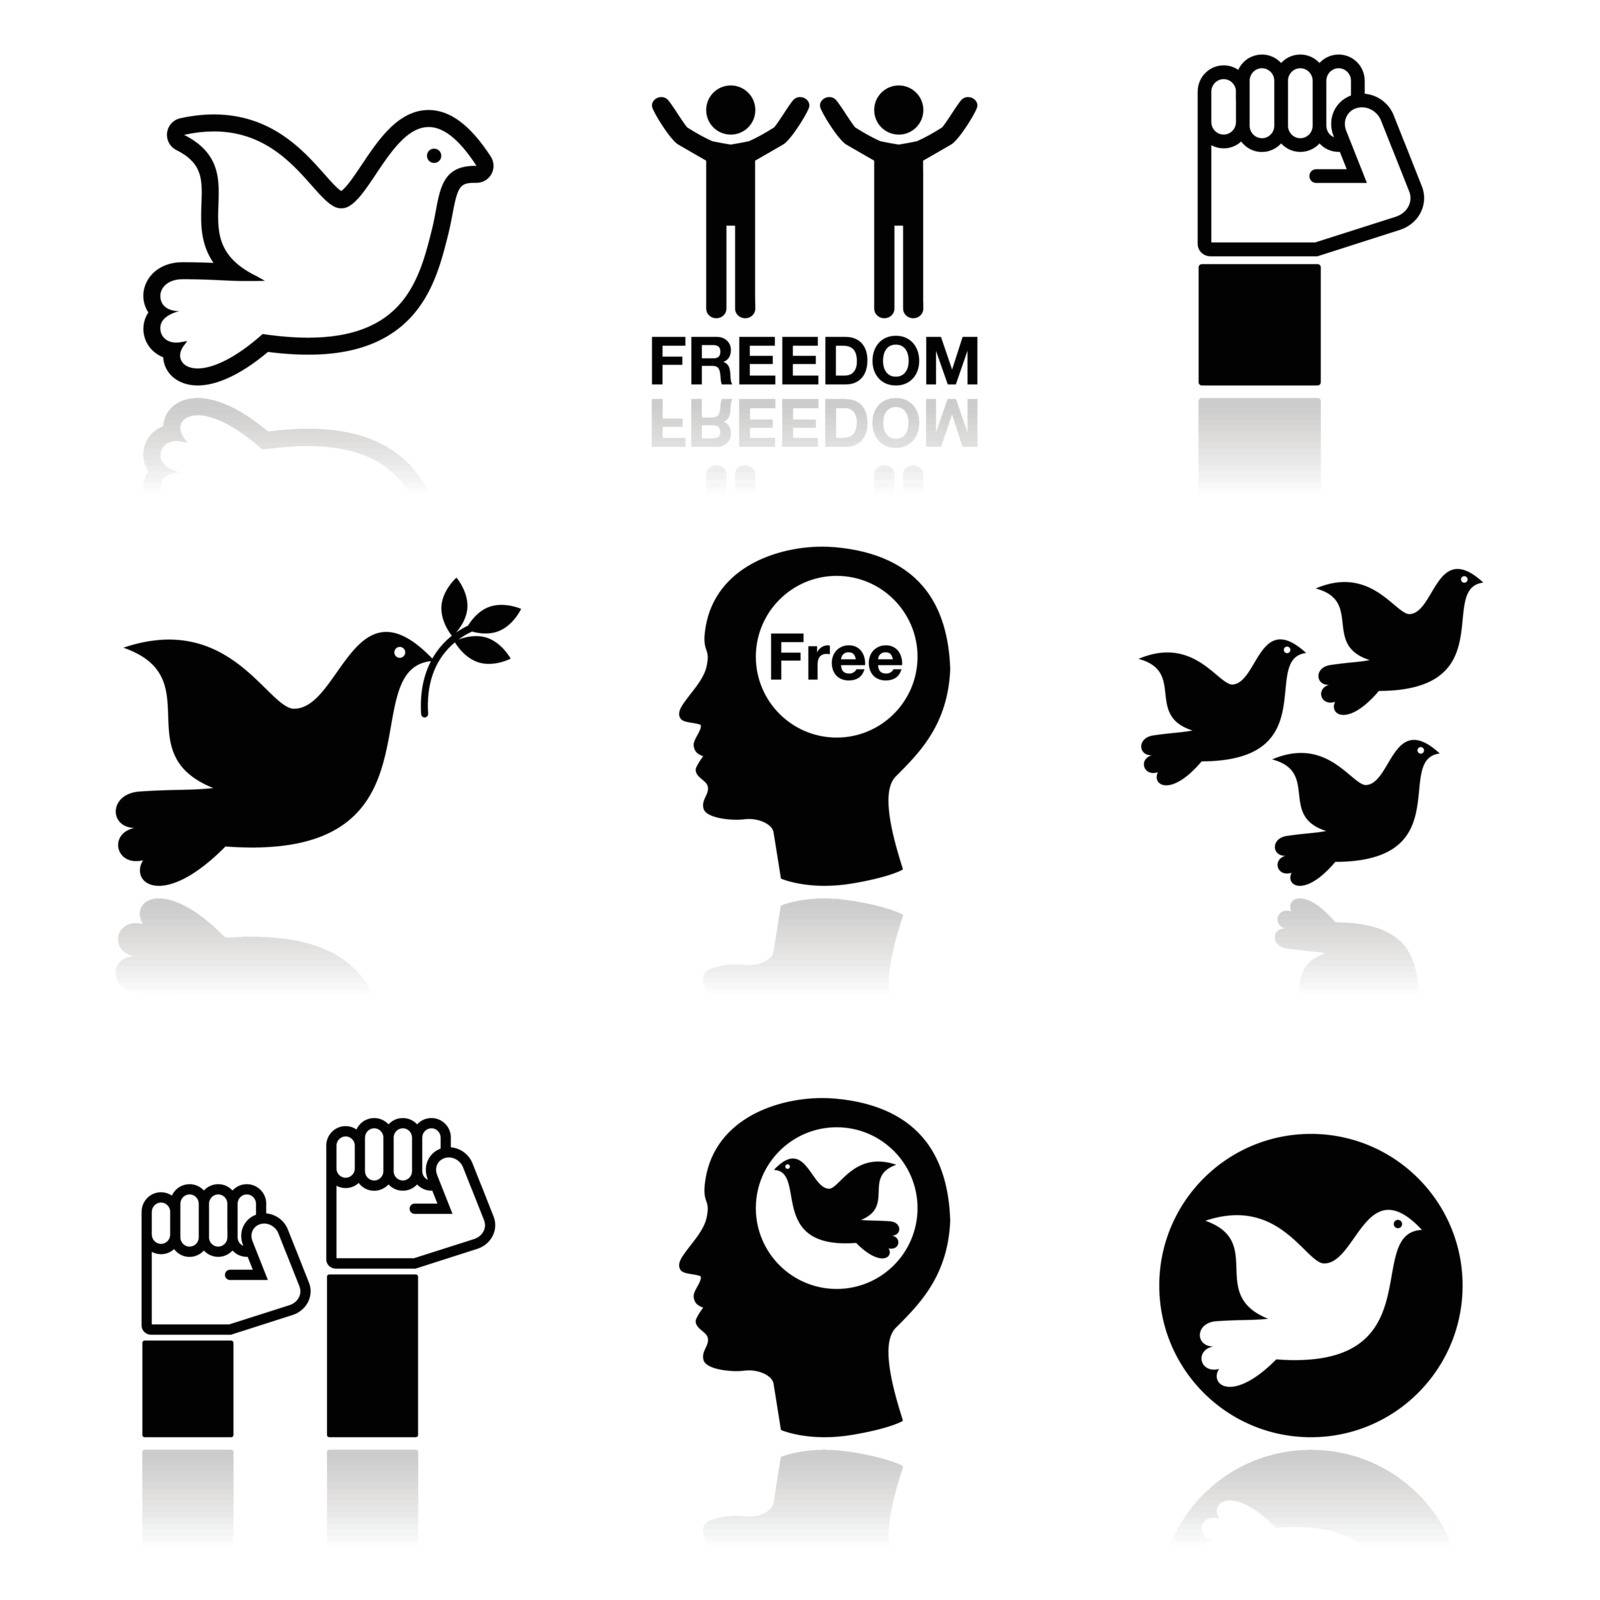 Freedom icons set - dove and fist symbols by RedKoala